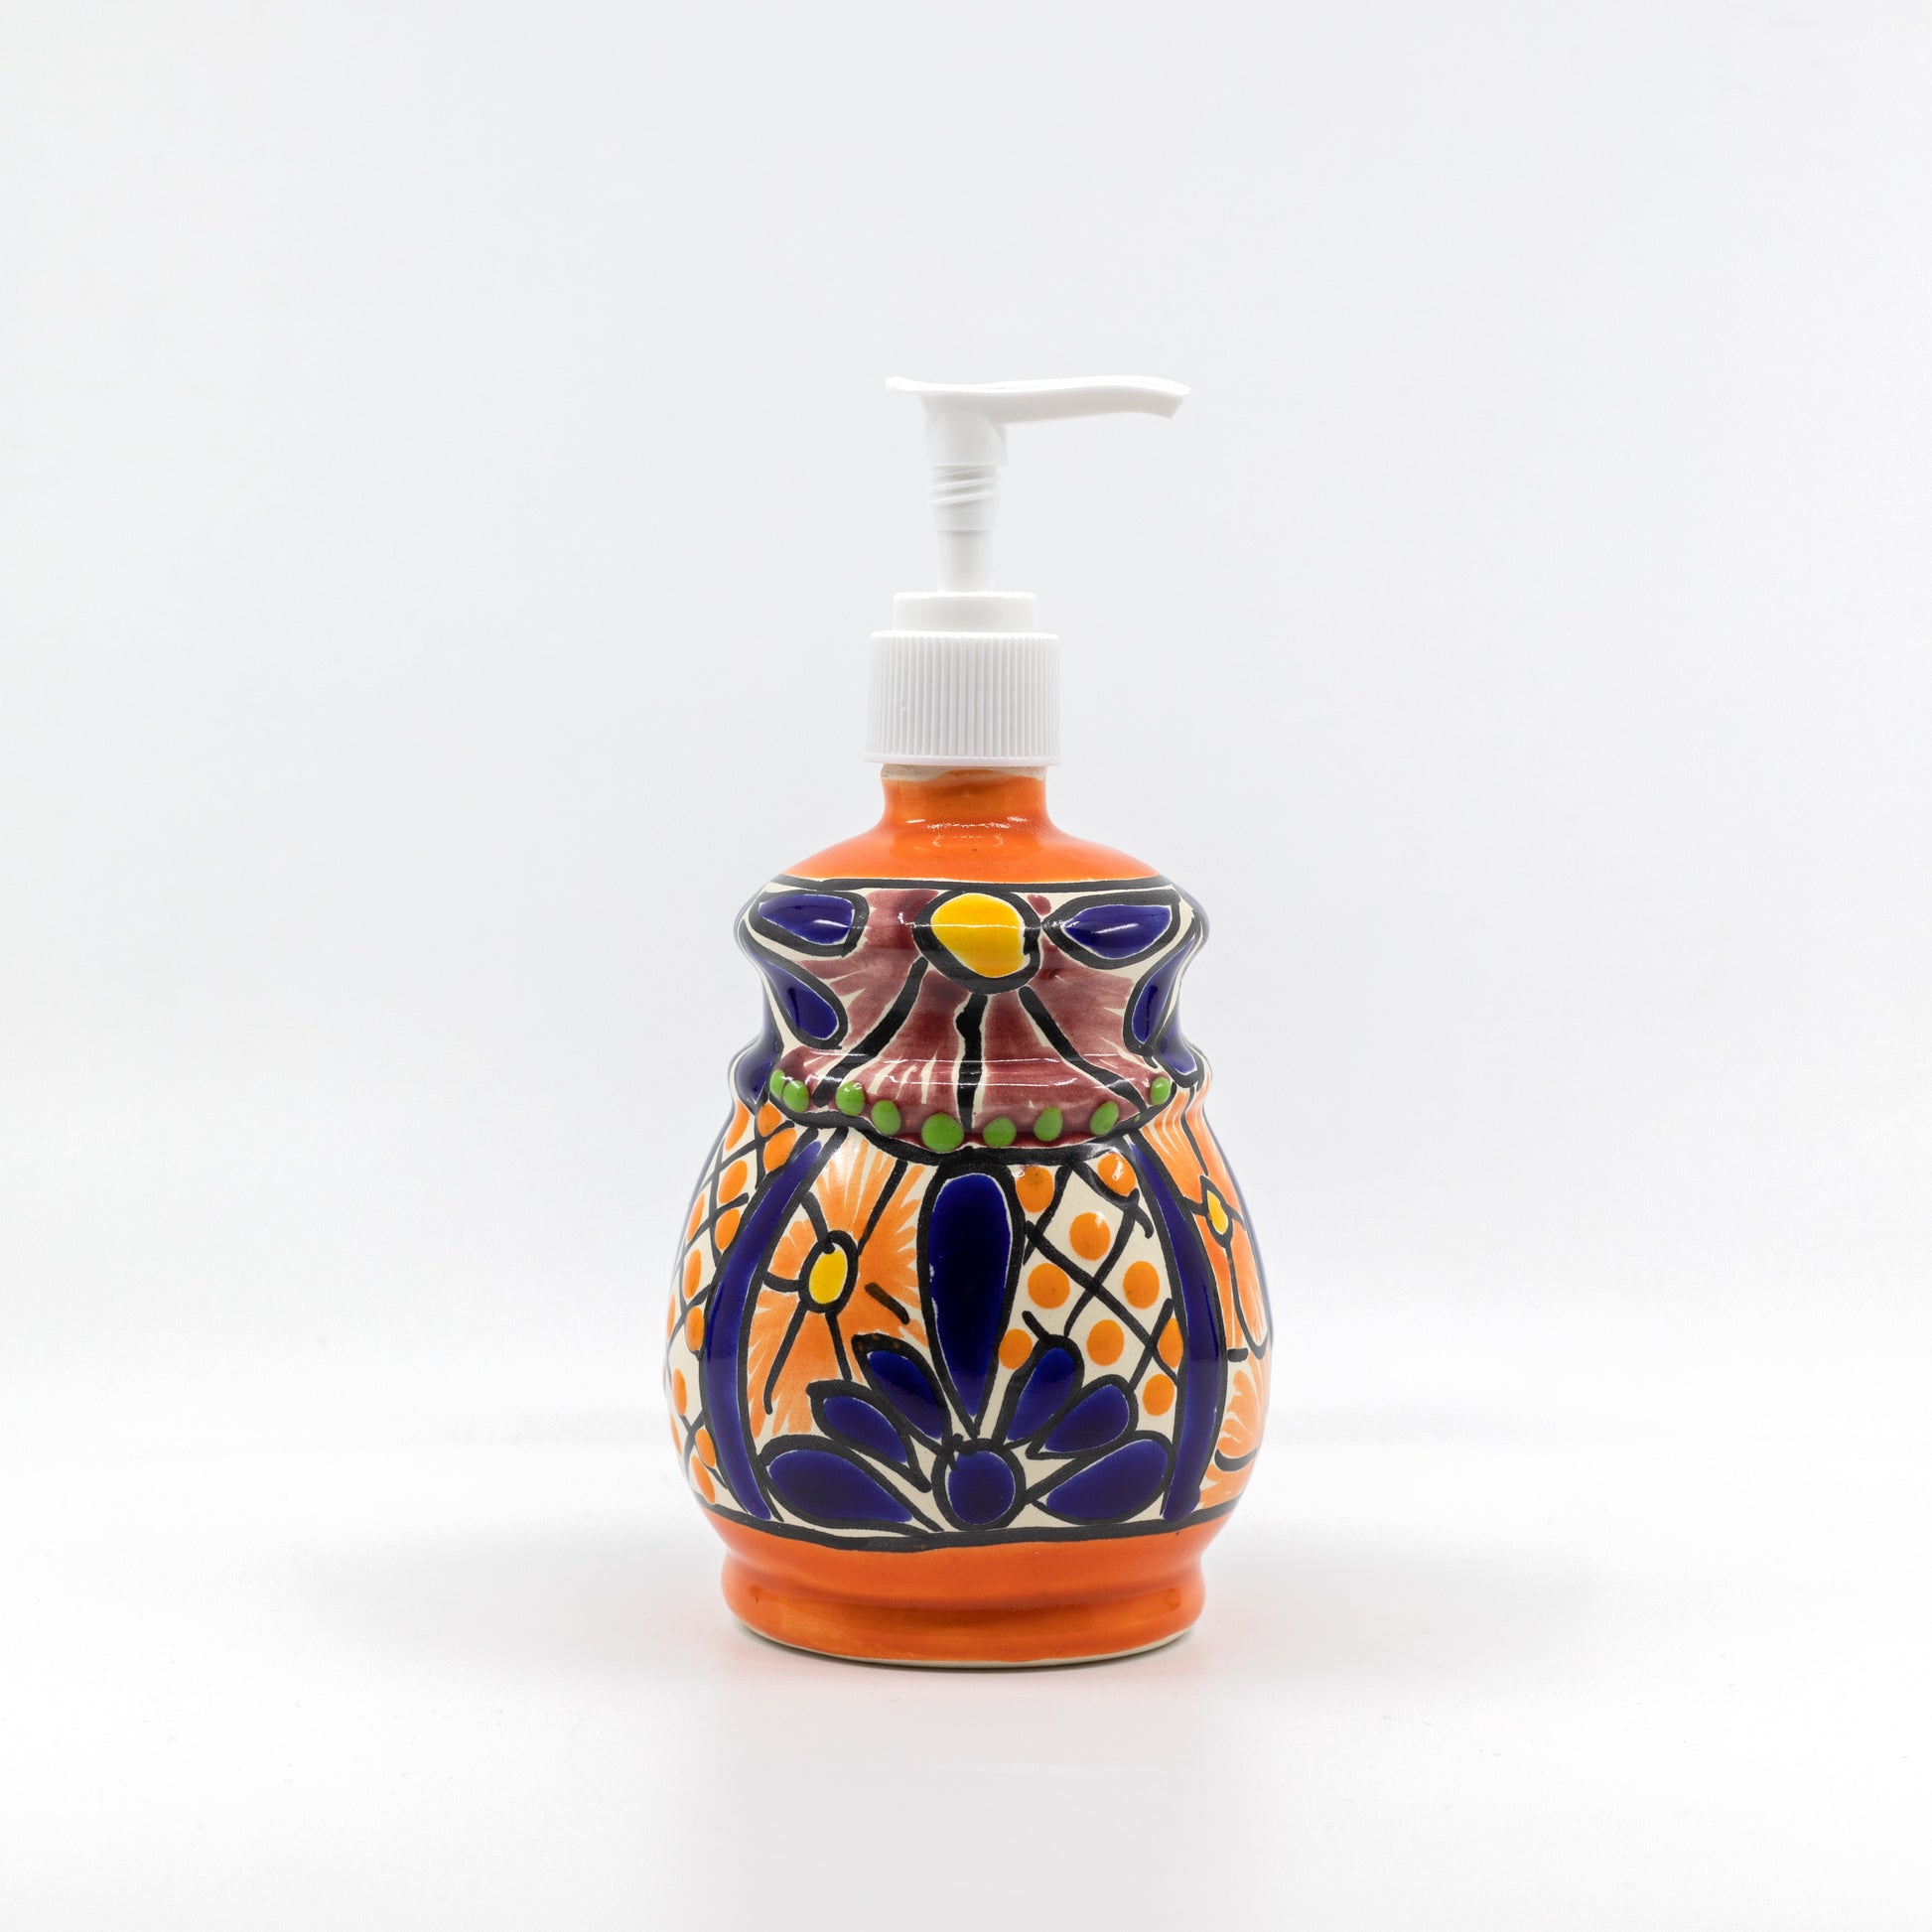 zoom out A multicolored, bell design, hand-painted Talavera ceramic soap dispenser sourced from skilled Mexican artisans.